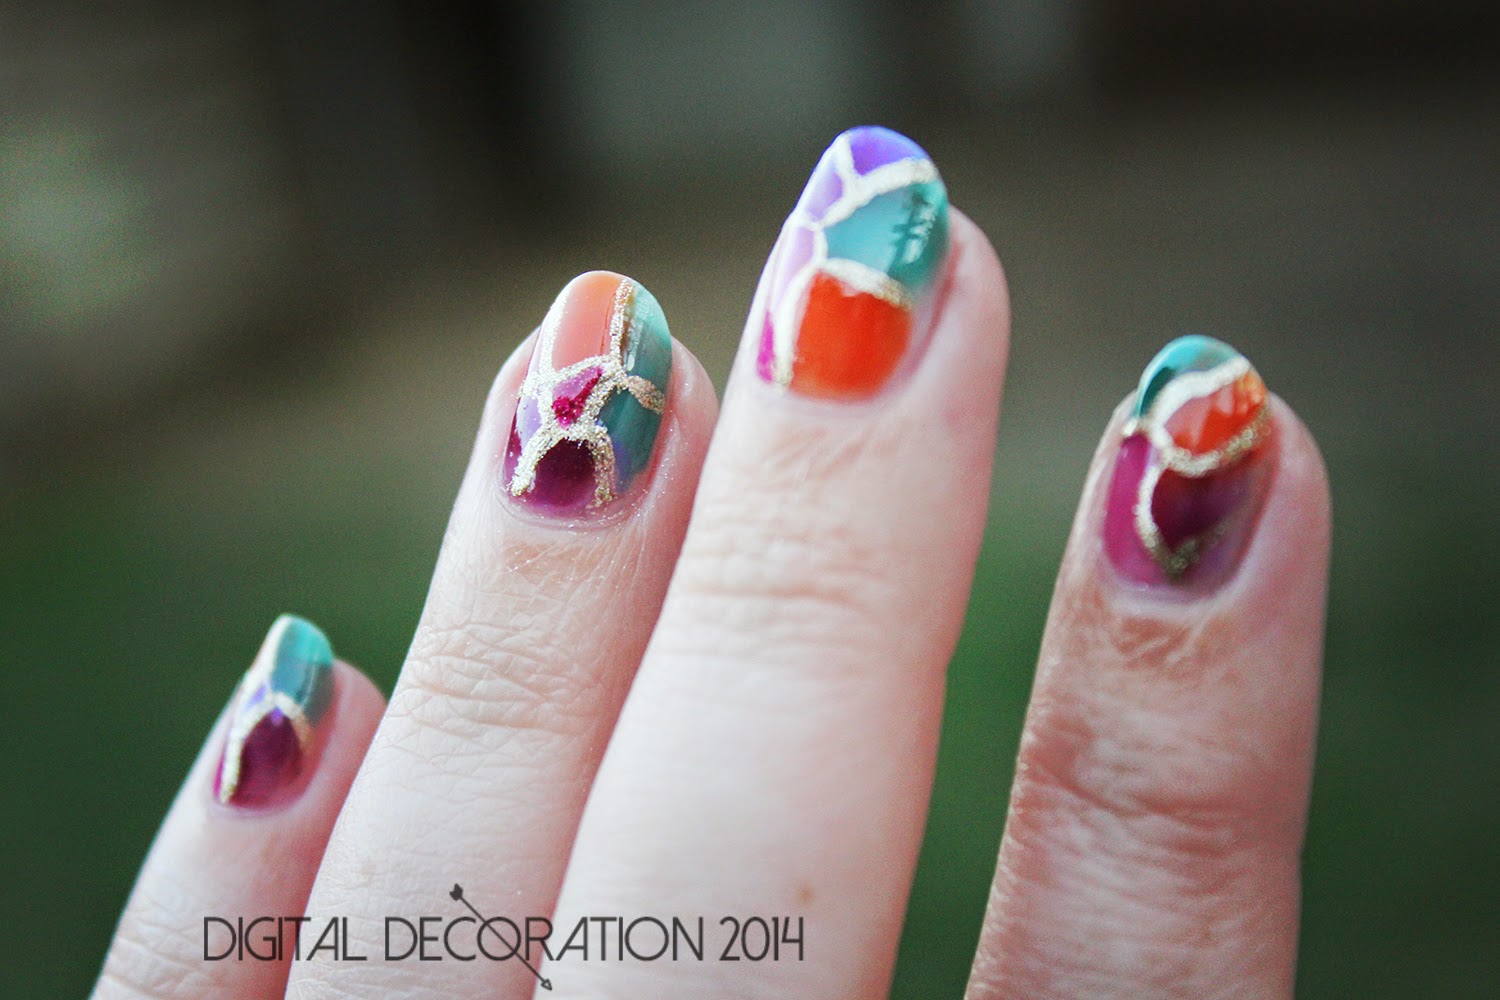 5. Stained Glass Nail Art with Nail Polish - wide 7